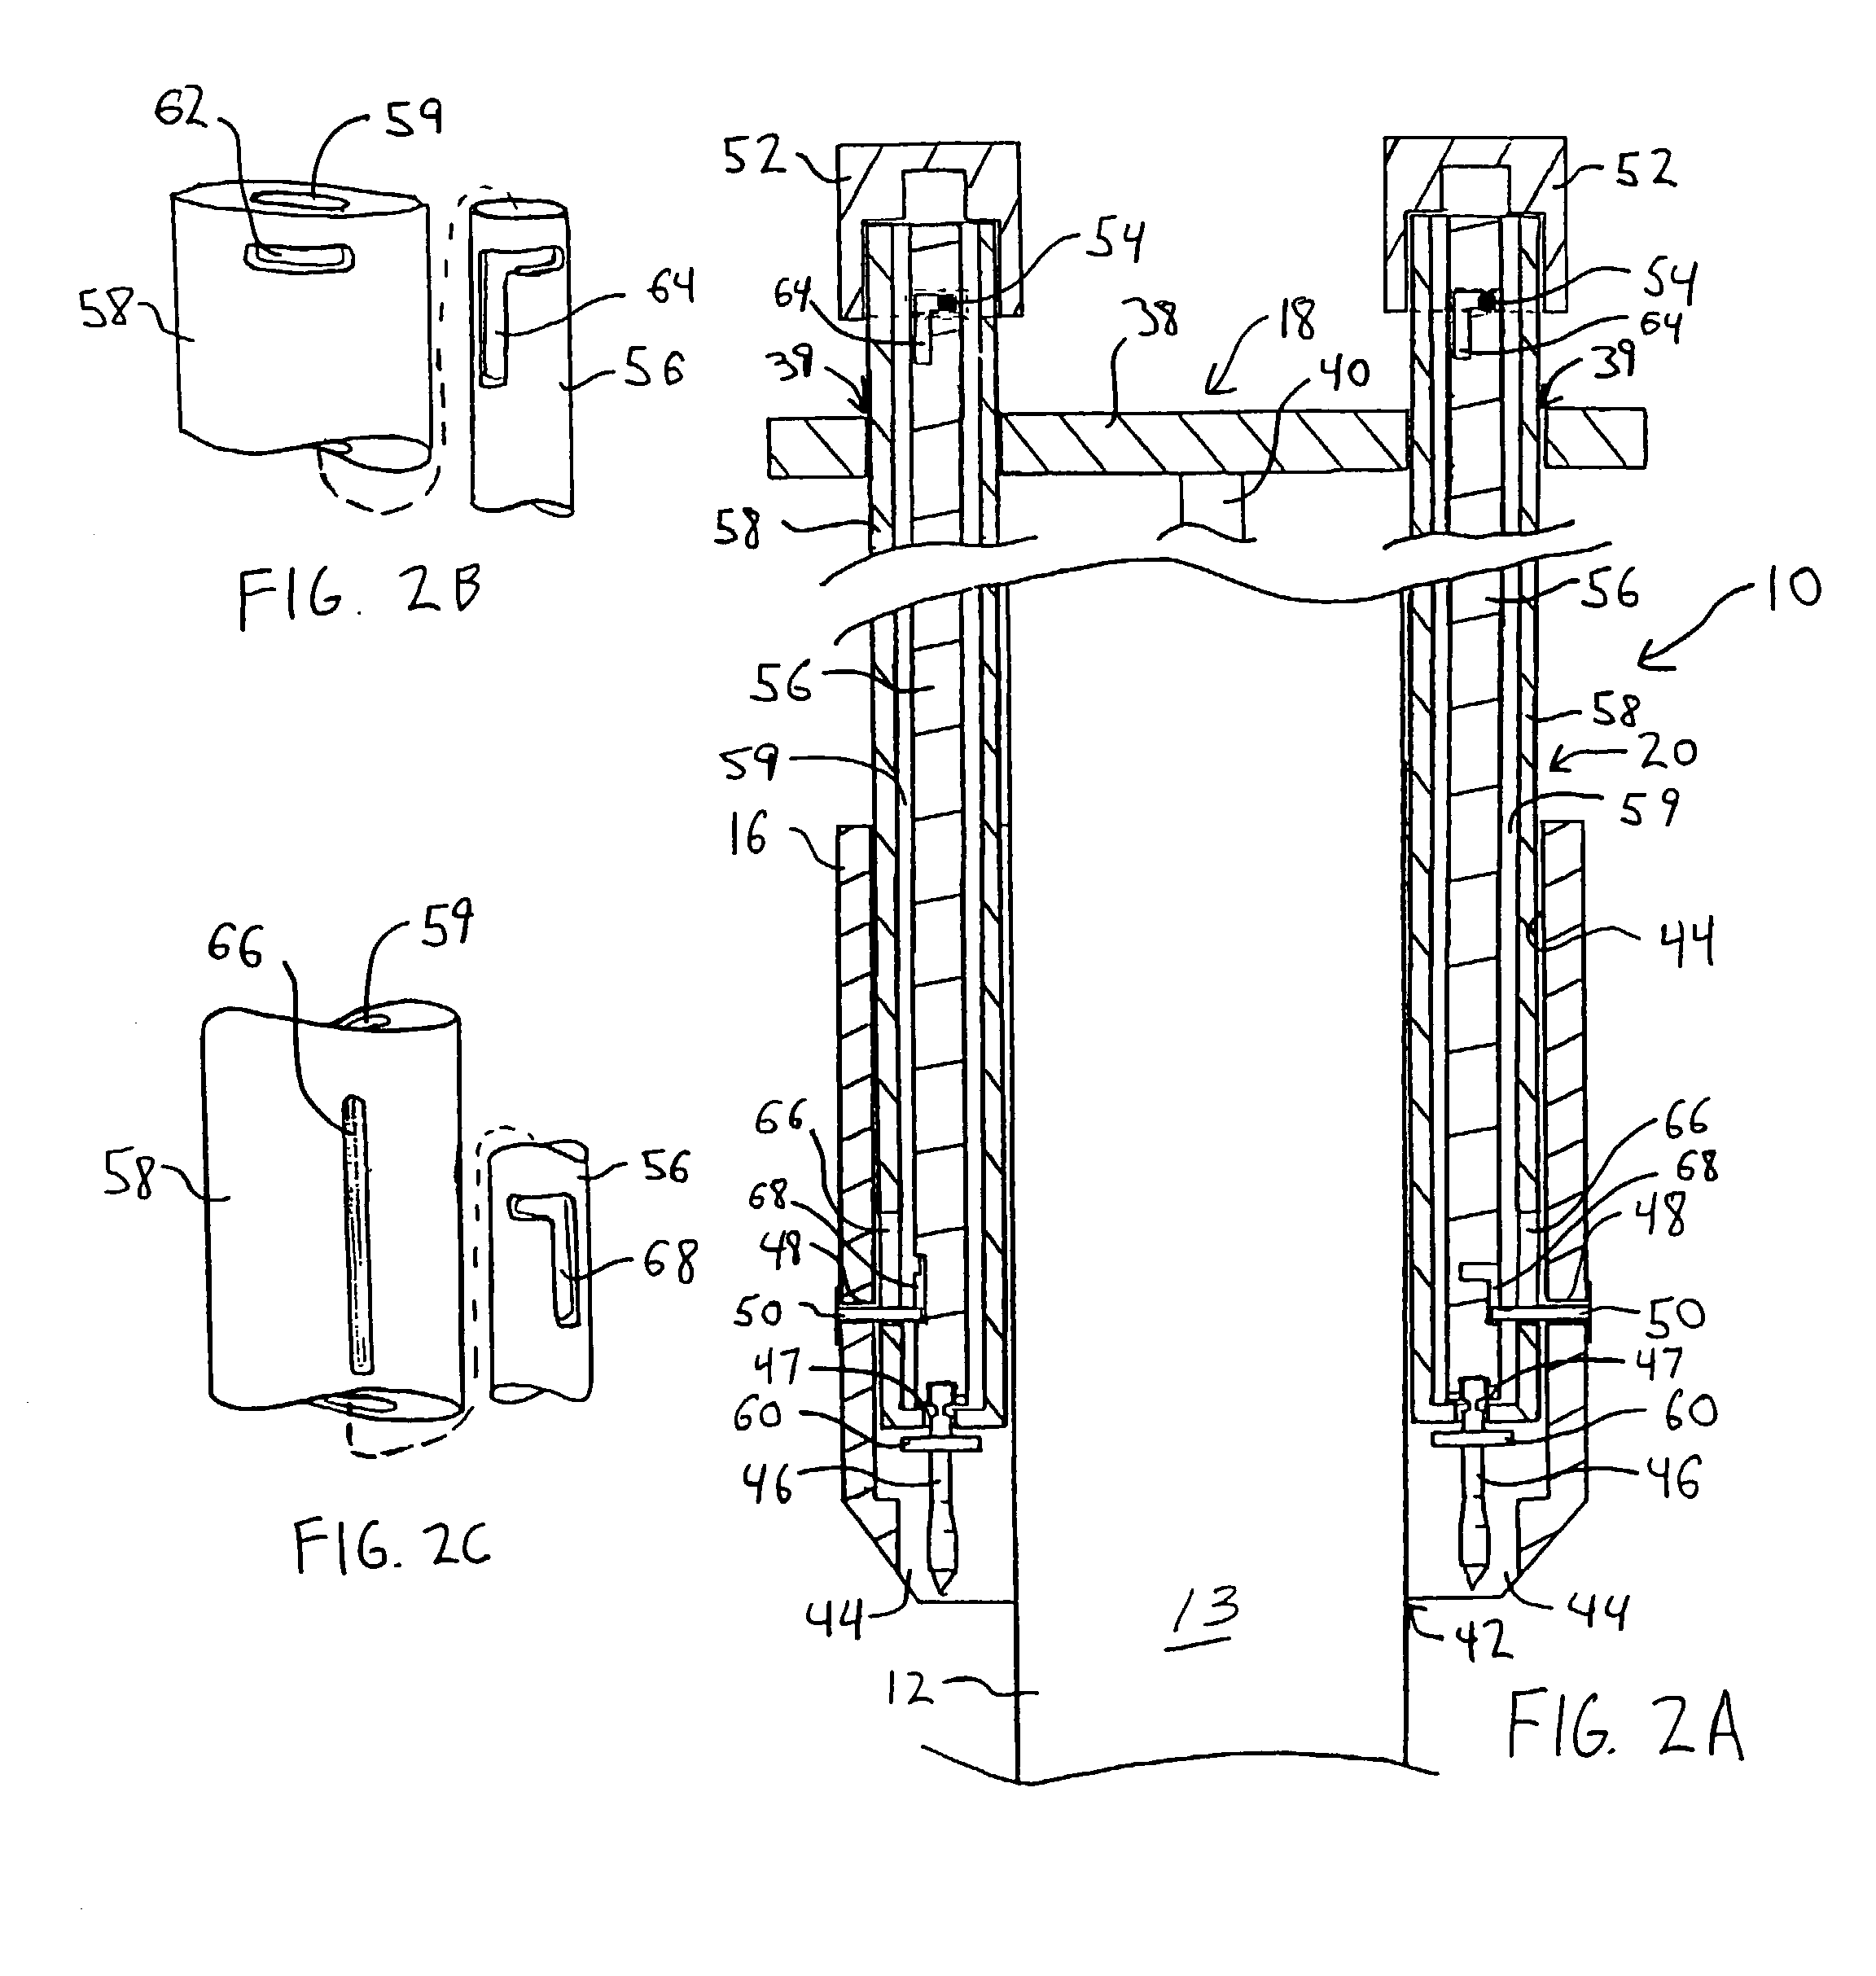 Vascular sheath with bioabsorbable puncture site closure apparatus and methods of use